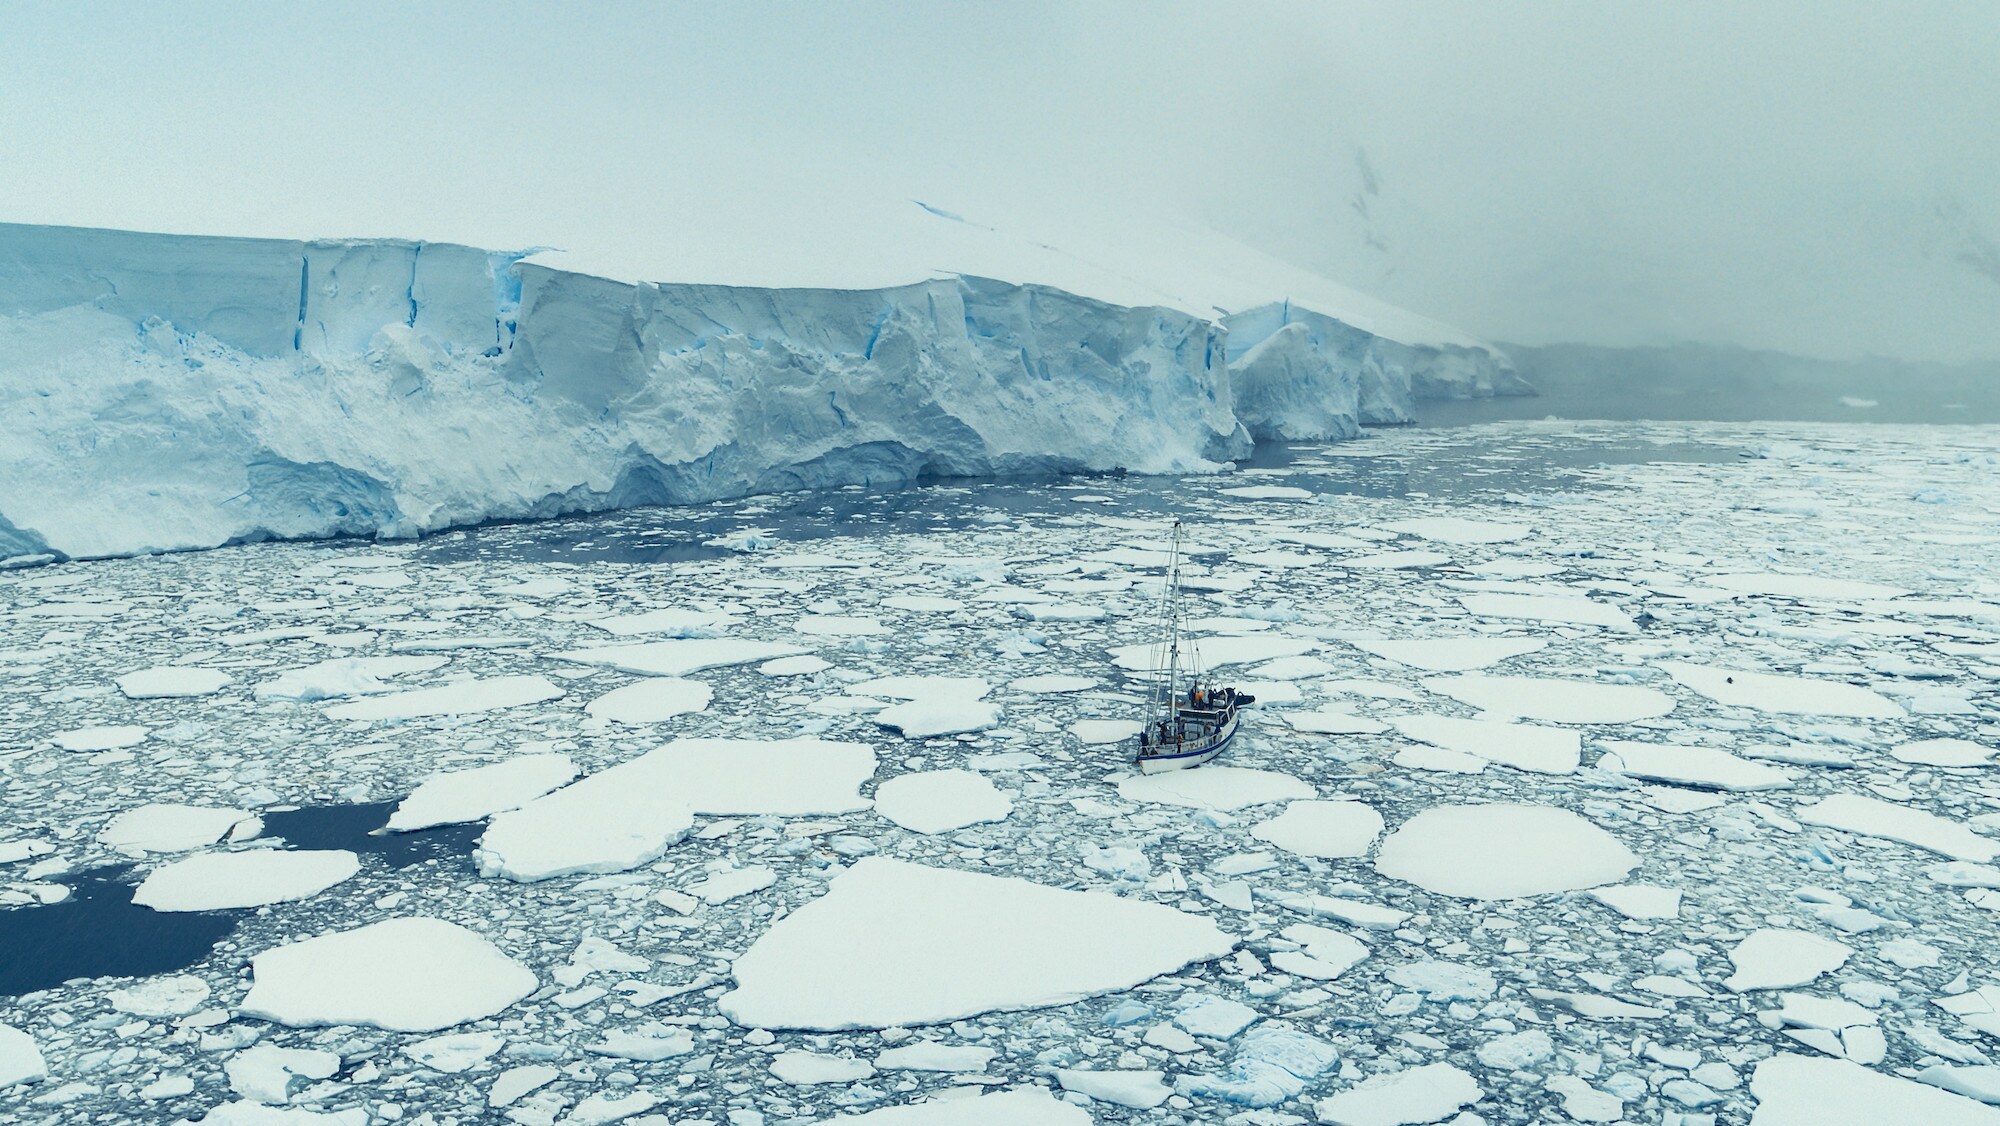 The Australis sailing through sea ice. (credit: National Geographic for Disney+/Bertie Gregory)